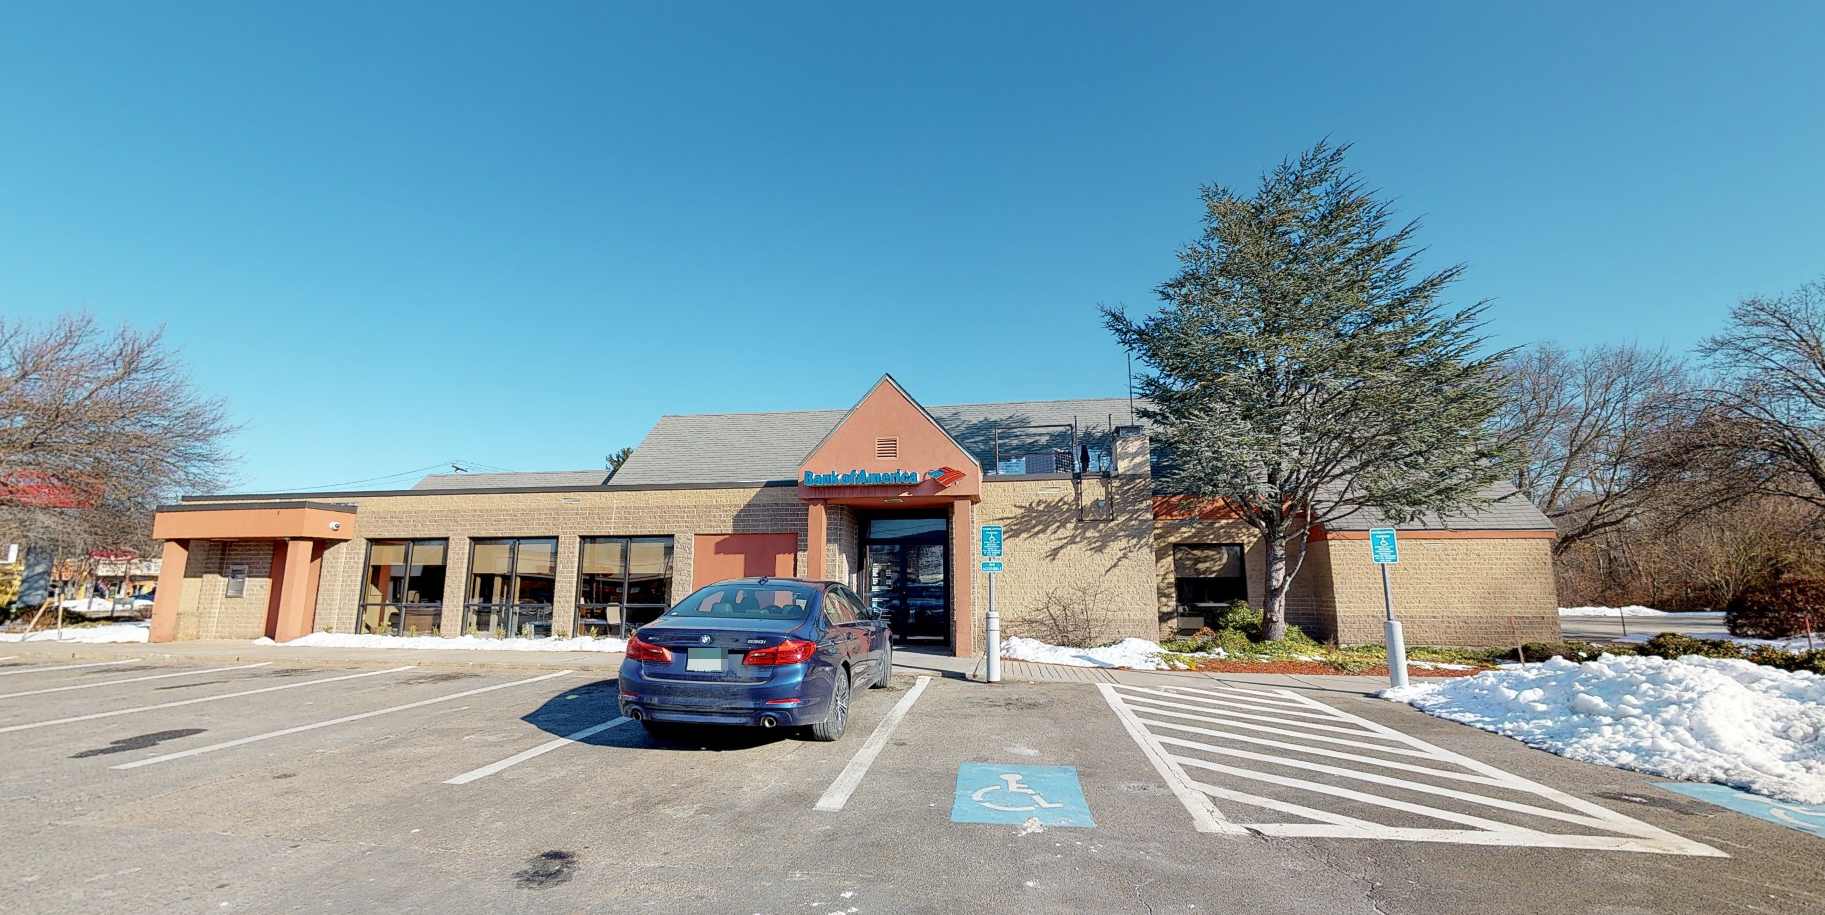 Bank of America financial center with drive-thru ATM and teller | 505 Pleasant St, Attleboro, MA 02703